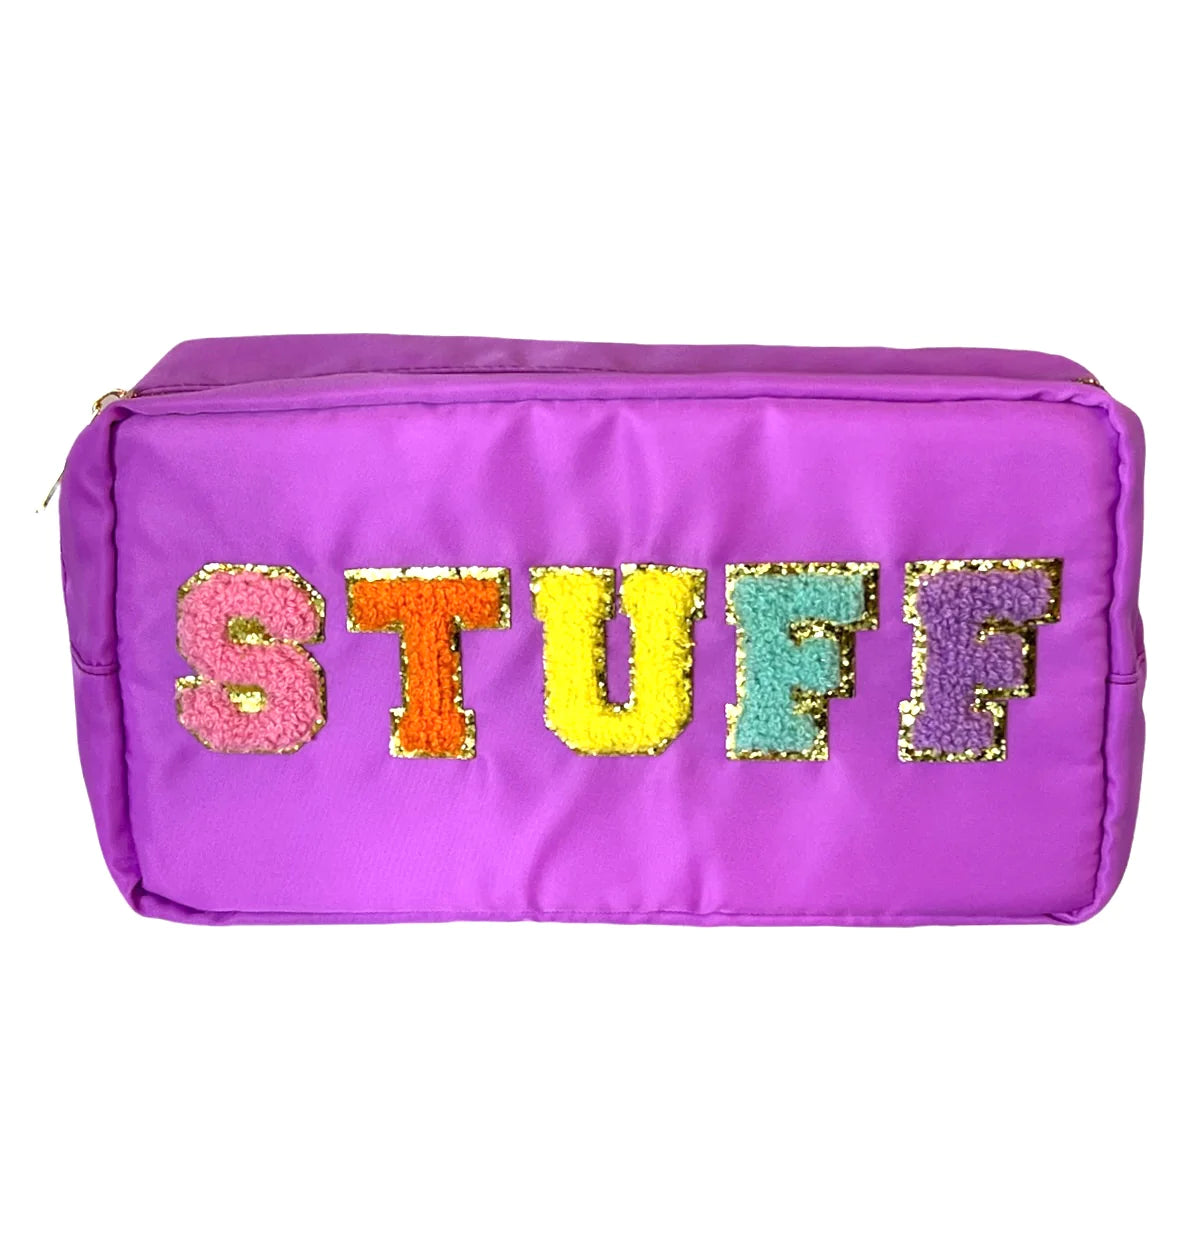 Varsity Collection: STUFF Cosmetic Bag